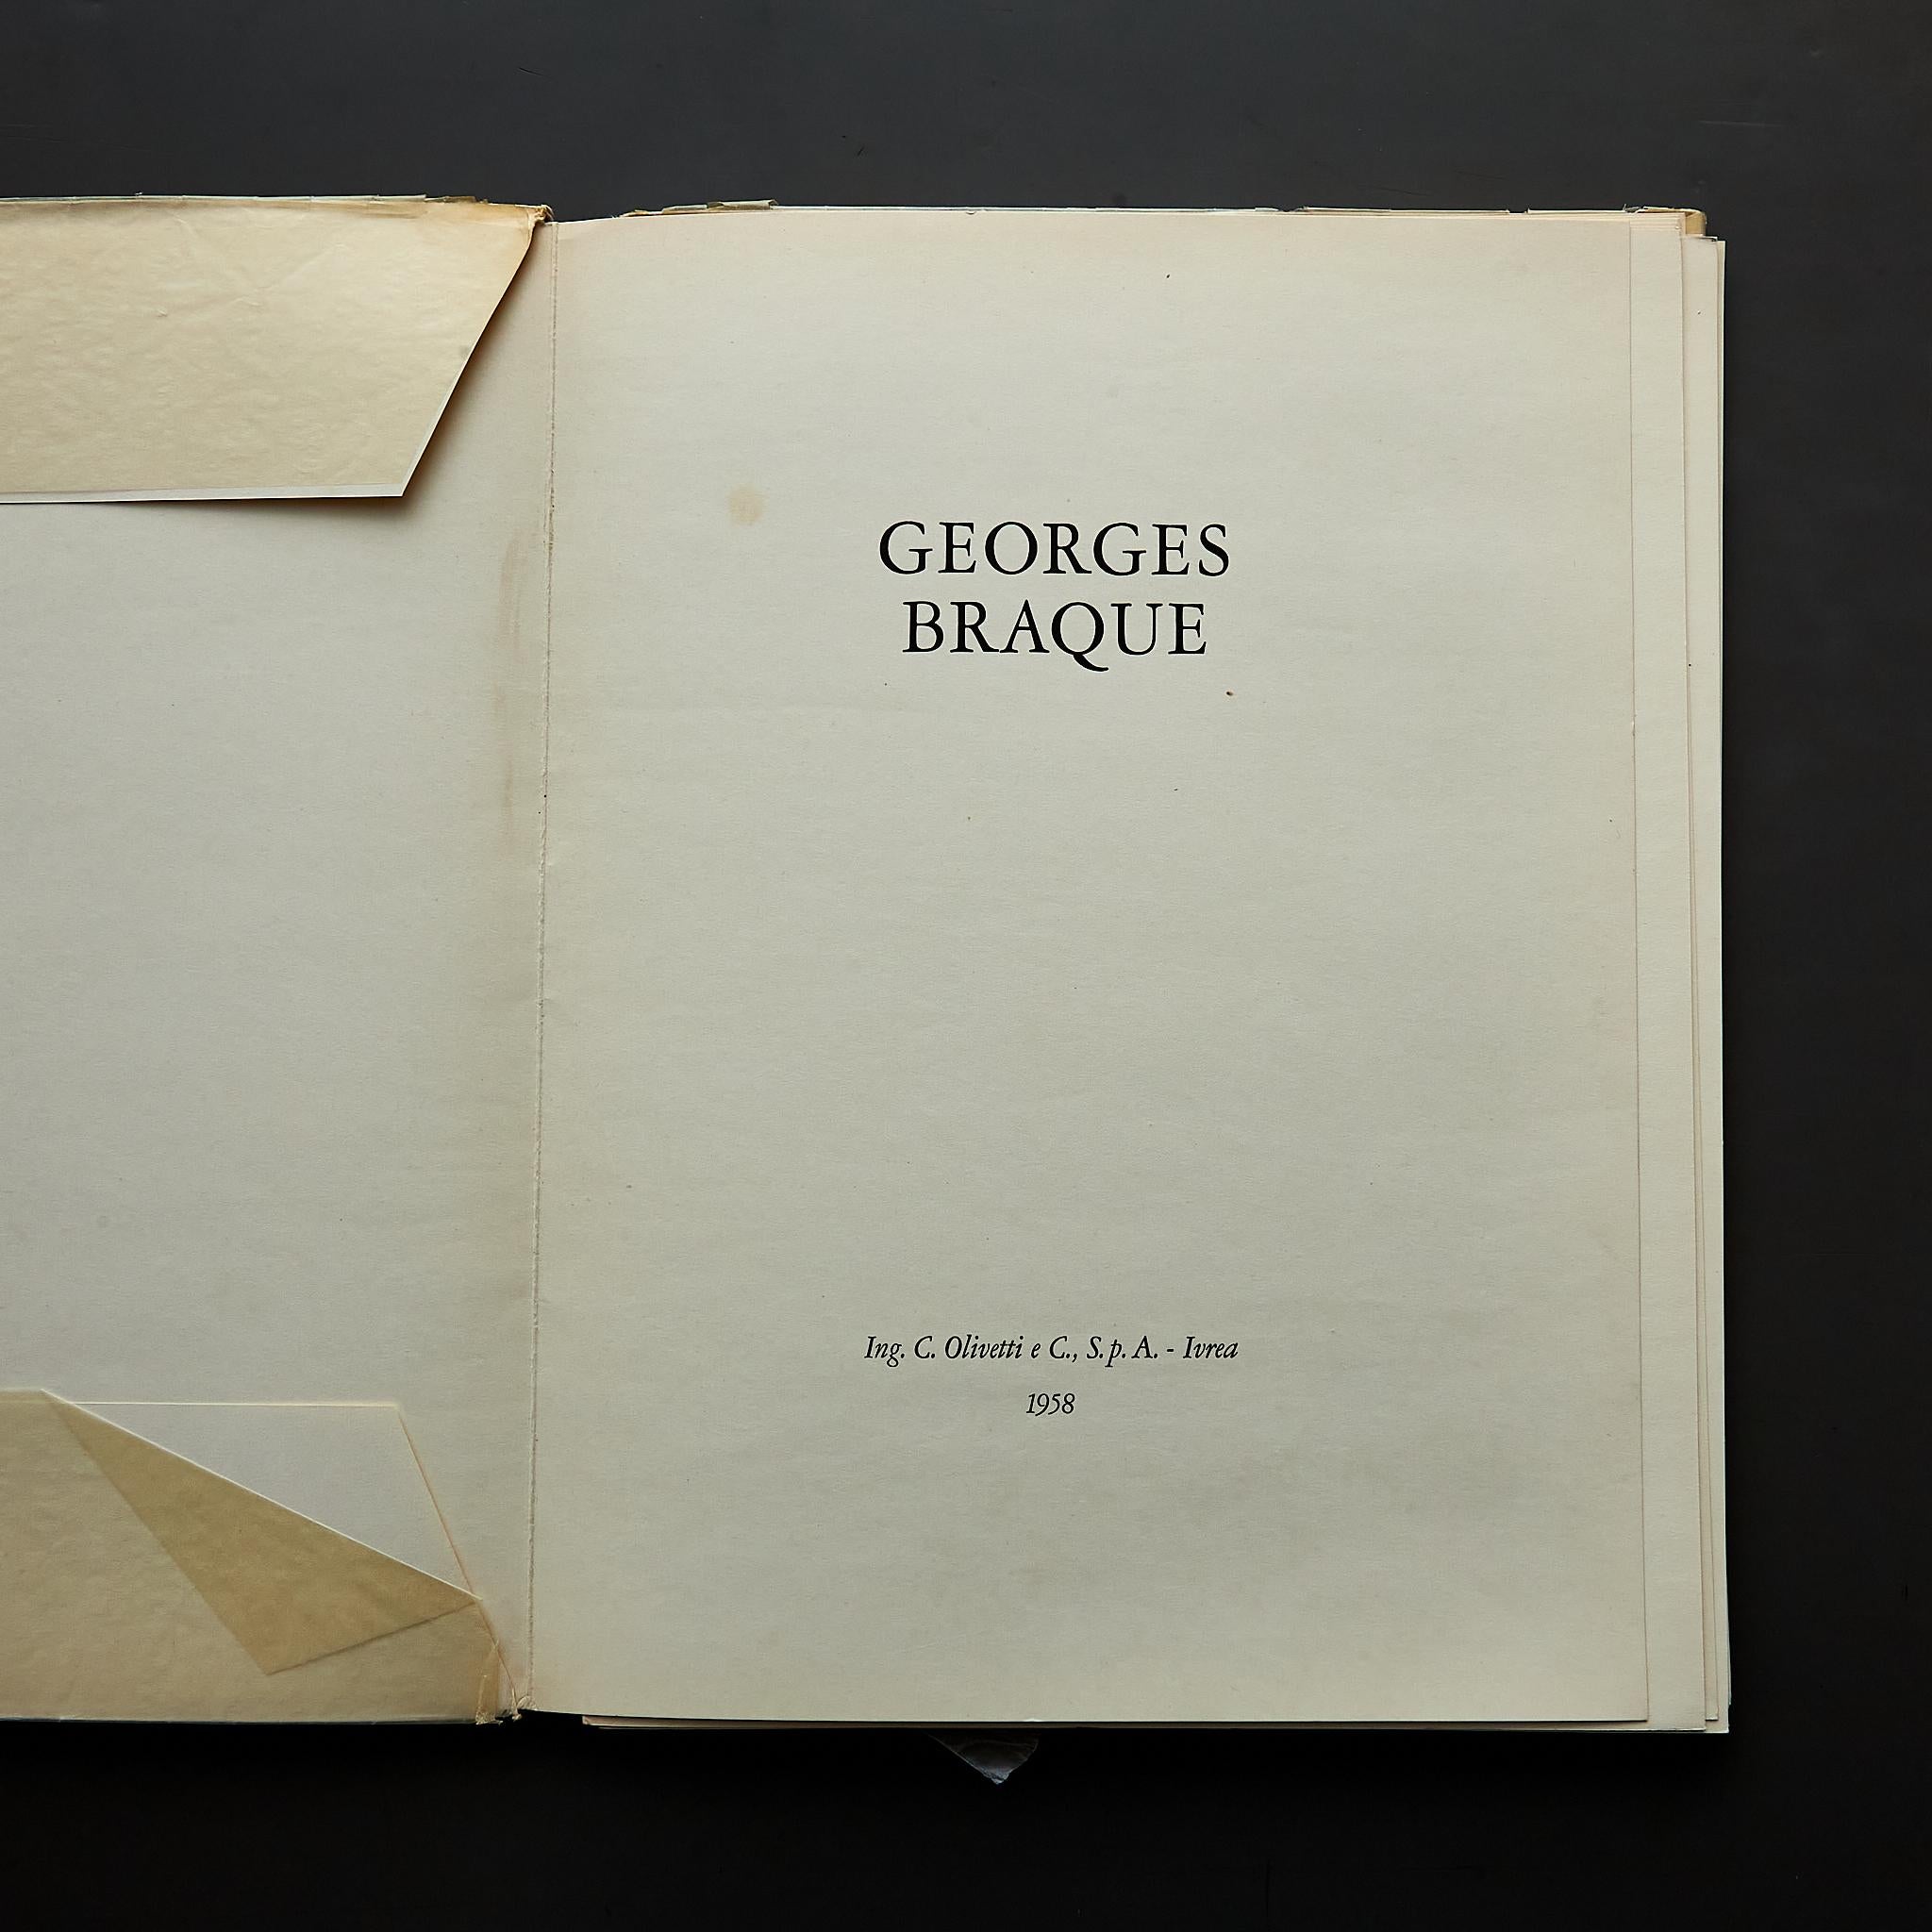 'George Braque' book by Ing. C. Olivetti e C., S.p.A. - Ivrea.

Manufactured in France, 1958

Materials:
Paper

Dimensions: 
D 1 cm x W 29 cm x H 39 cm

In good original condition, with consistent with age and use, preserving a beautiful patina with